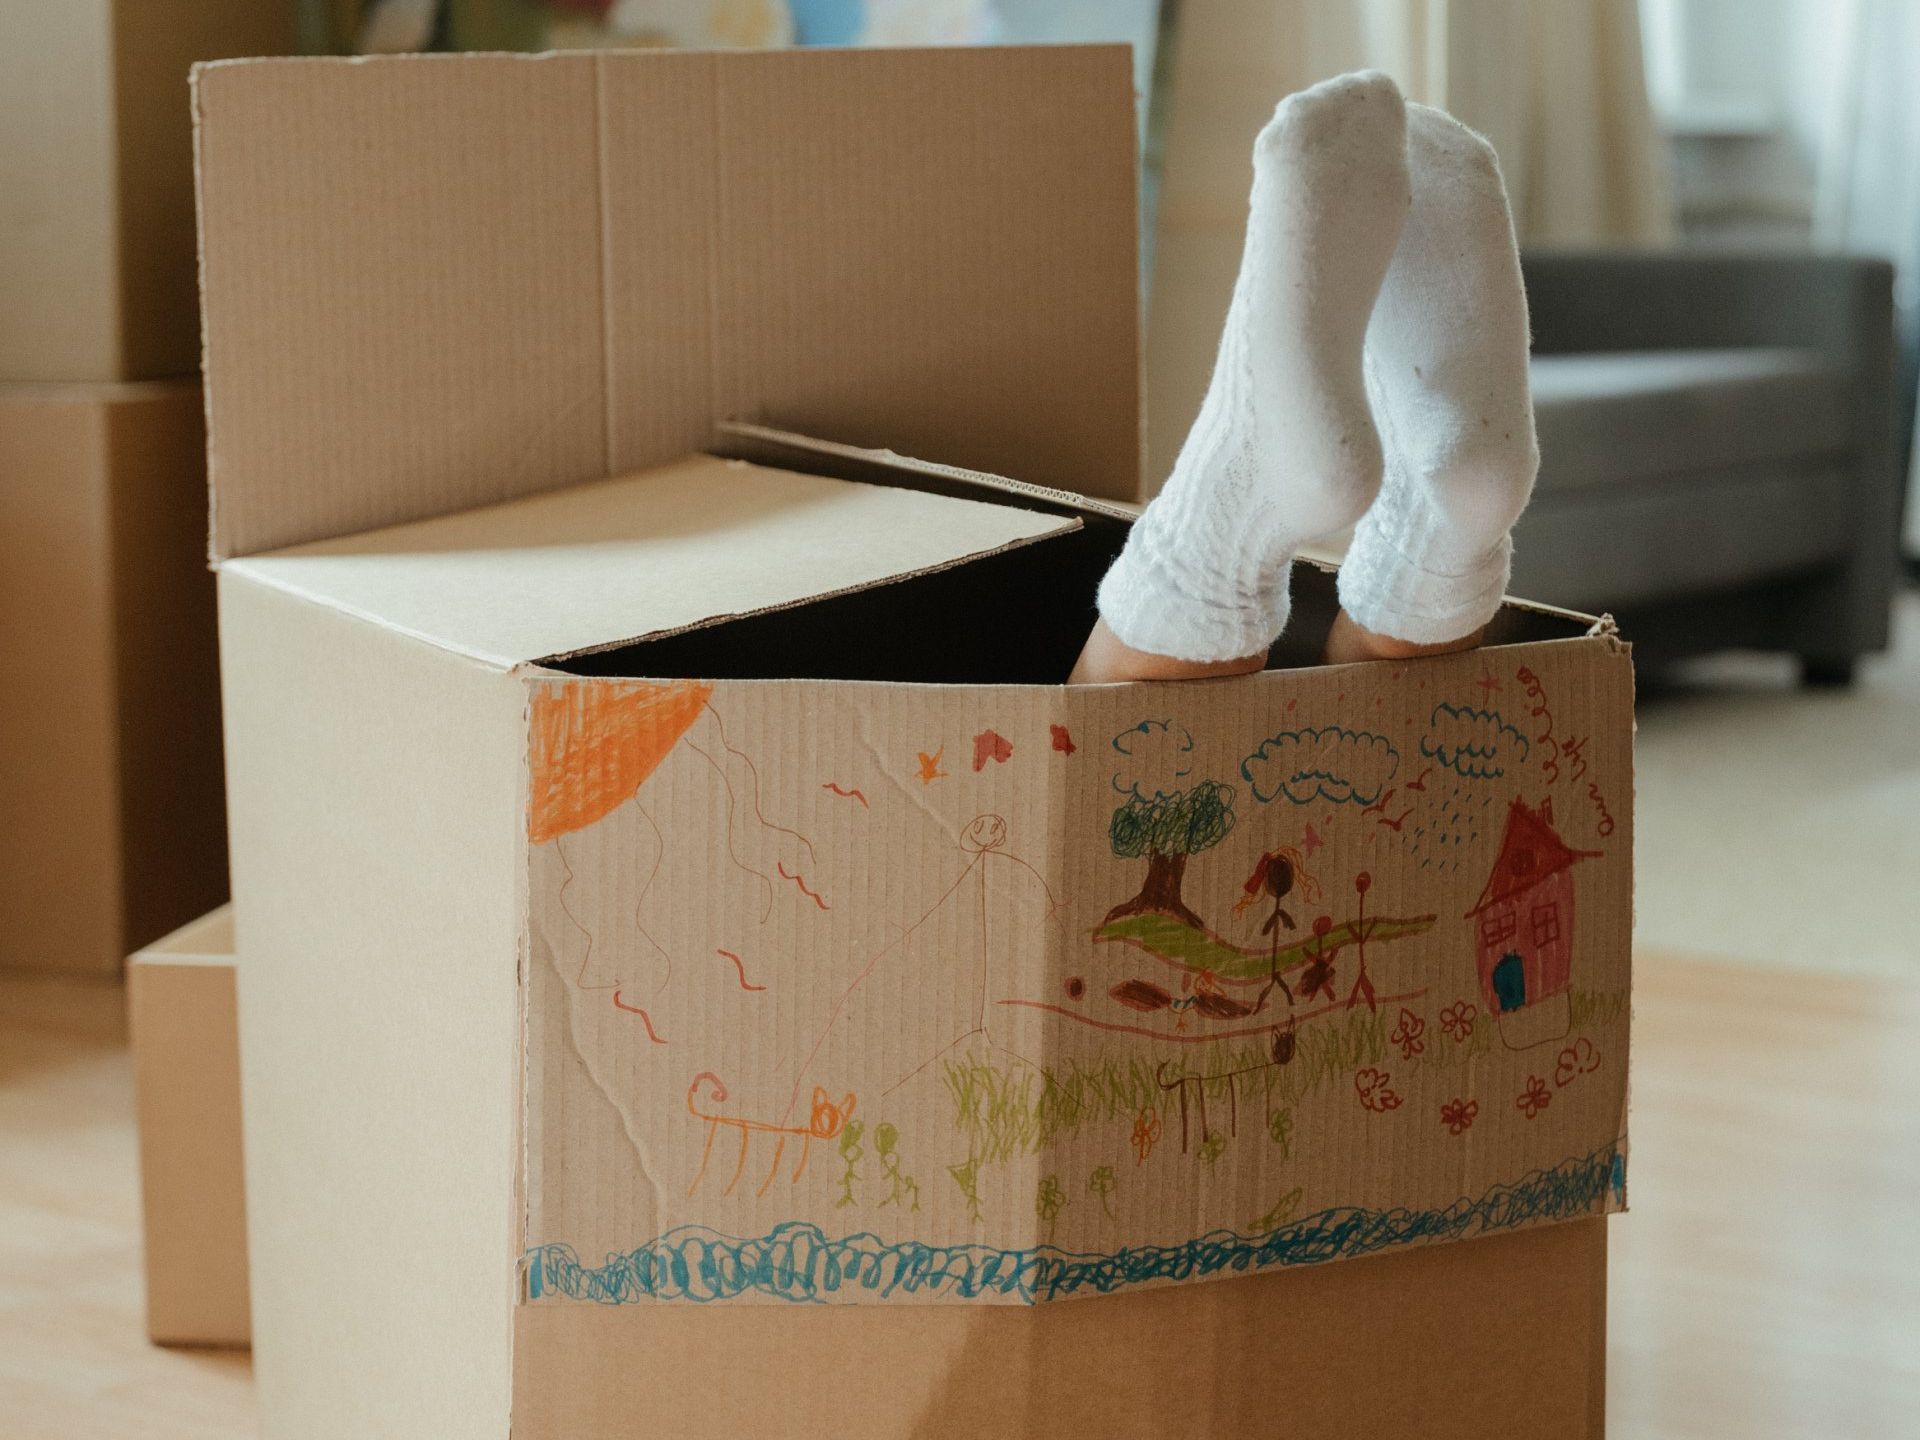 A person 's feet are sticking out of a cardboard box.